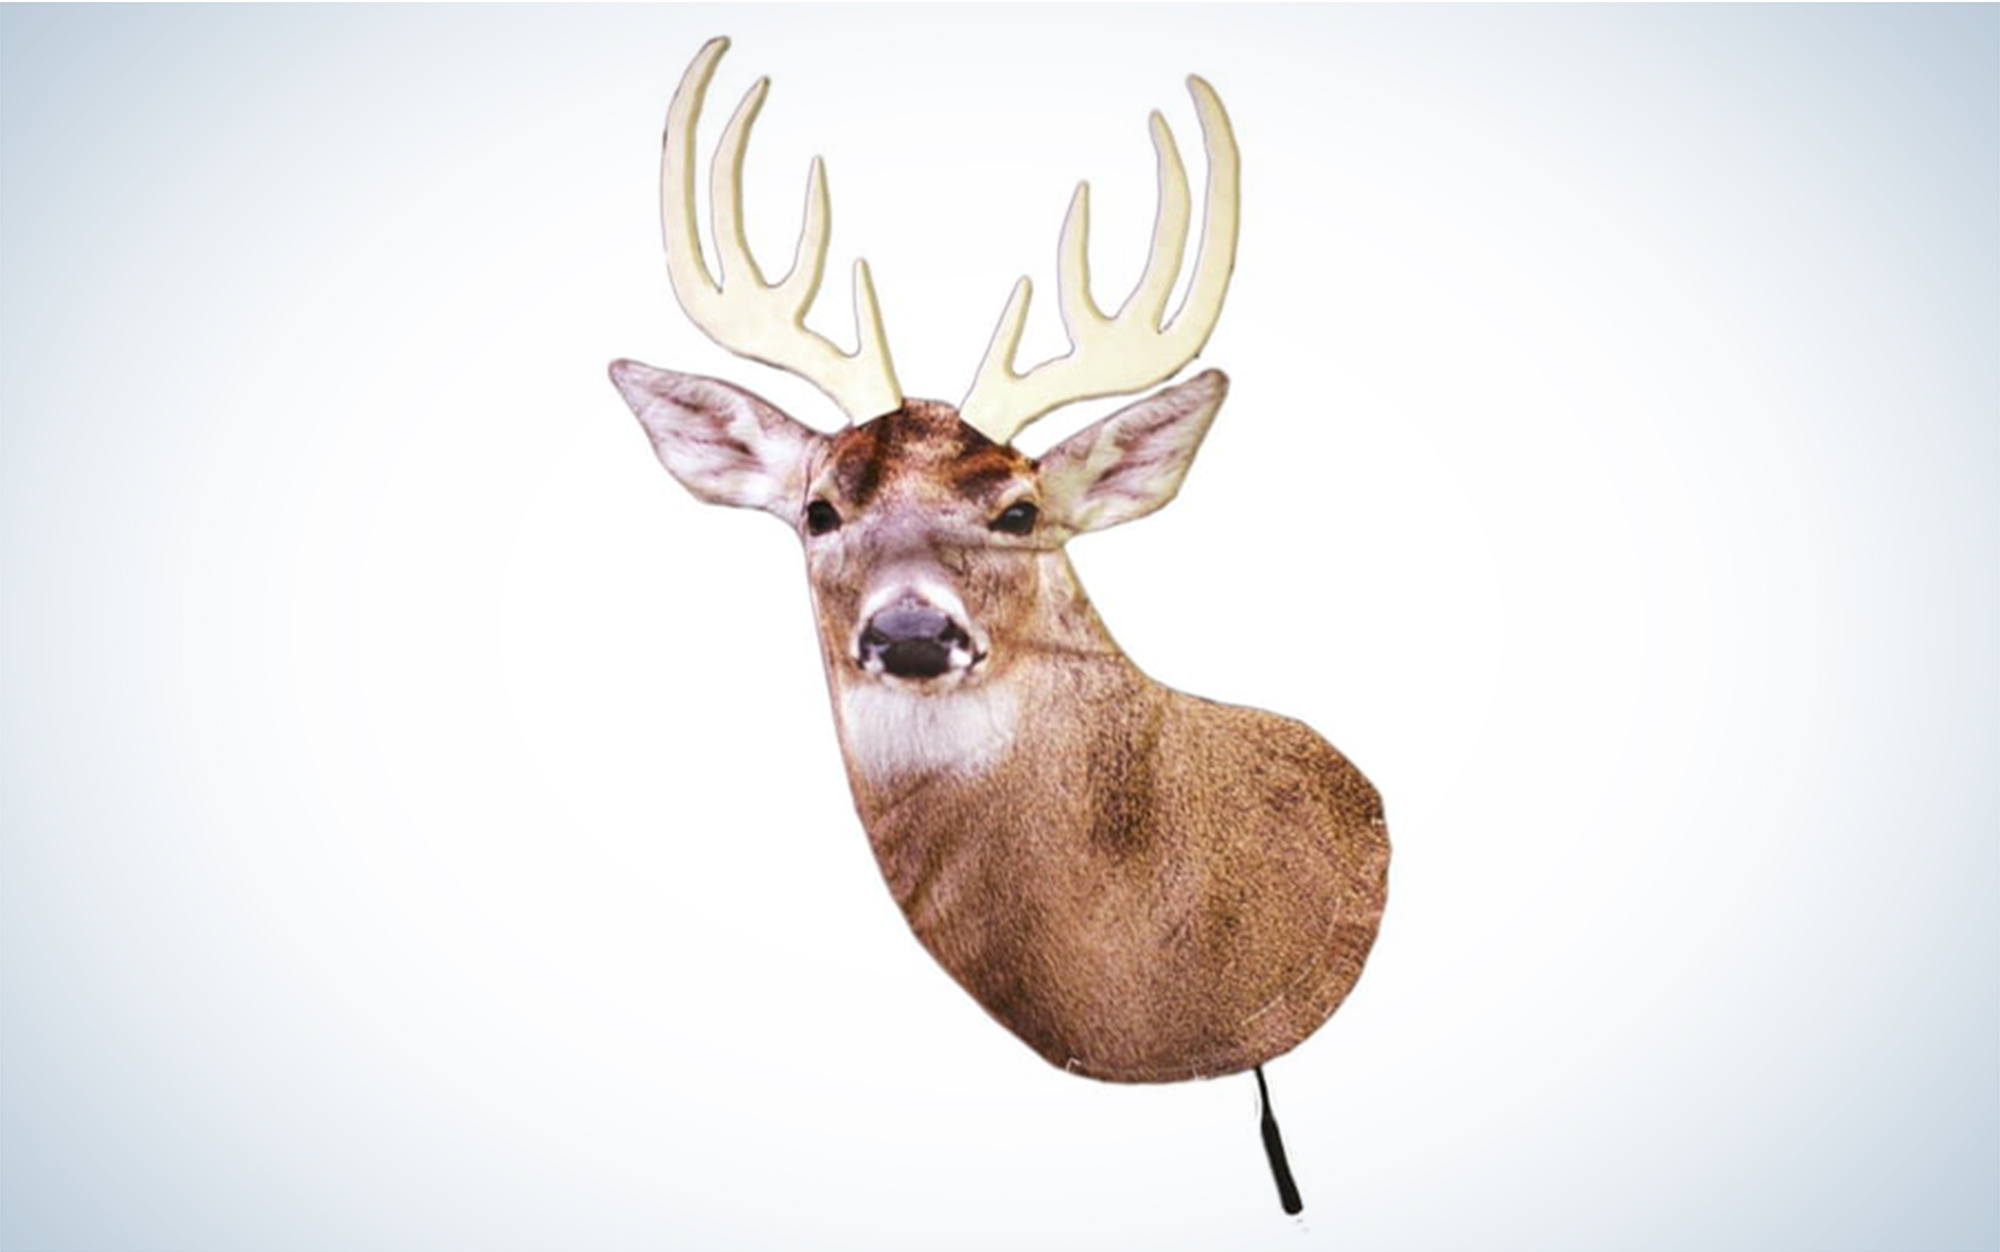 The Heads Up Decoy Whitetail Buck is the best portable deer decoy.